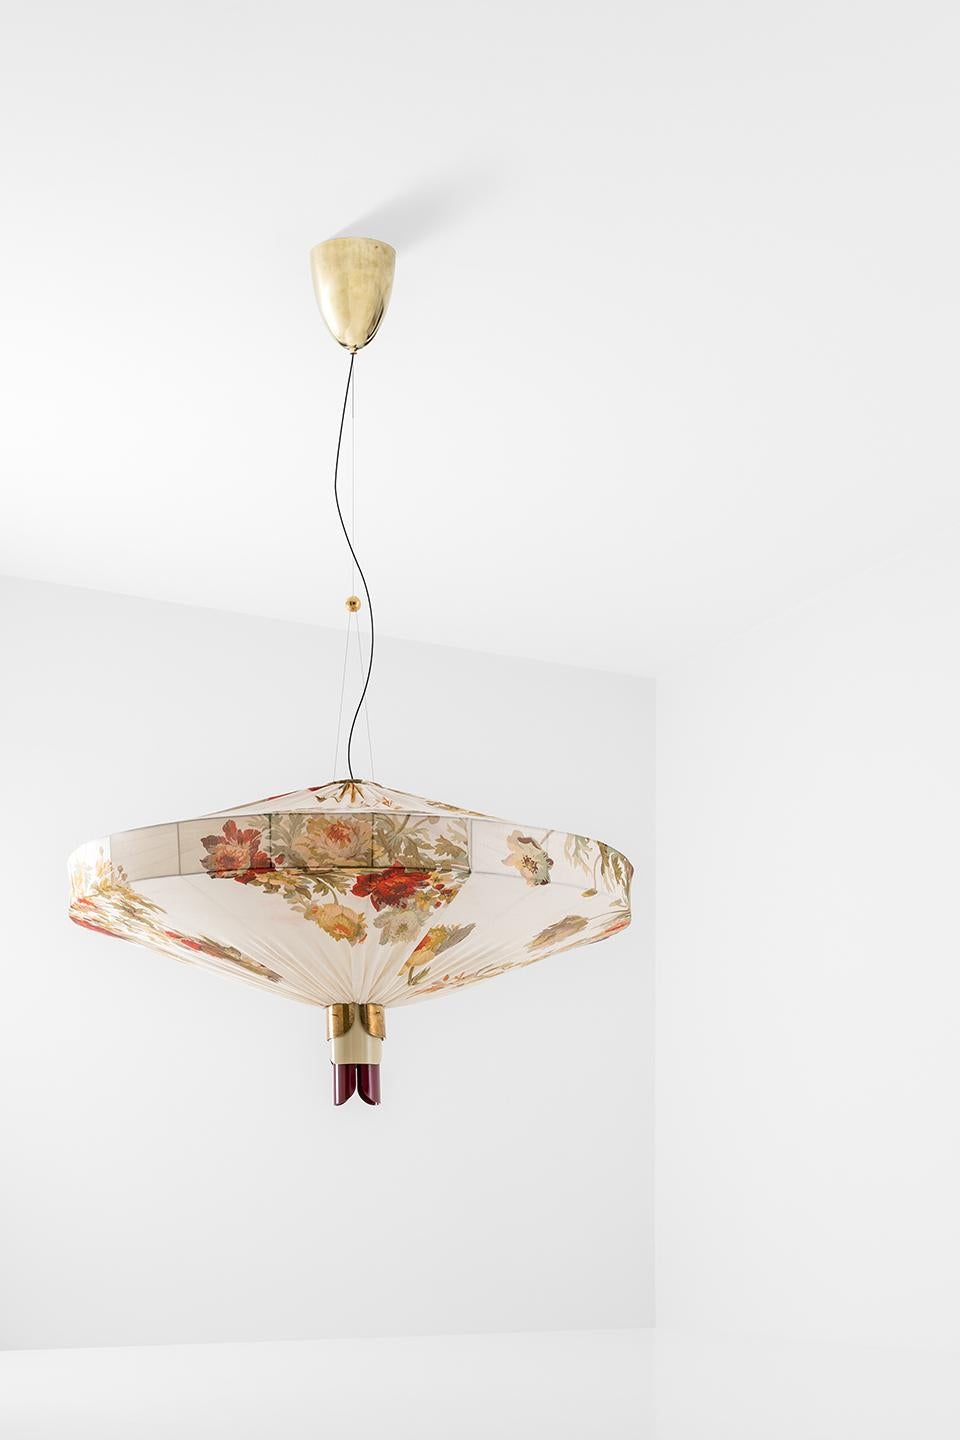 Ceiling lamp in natural brass covered with printed silk. Decorative details in brass and painted metal.
Ribbed glass internal lampshade.
Progetto Non Finito collection from Dimoremilano, by designer Dimorestudio.
Code: Lampada109 
22% VAT WILL BE